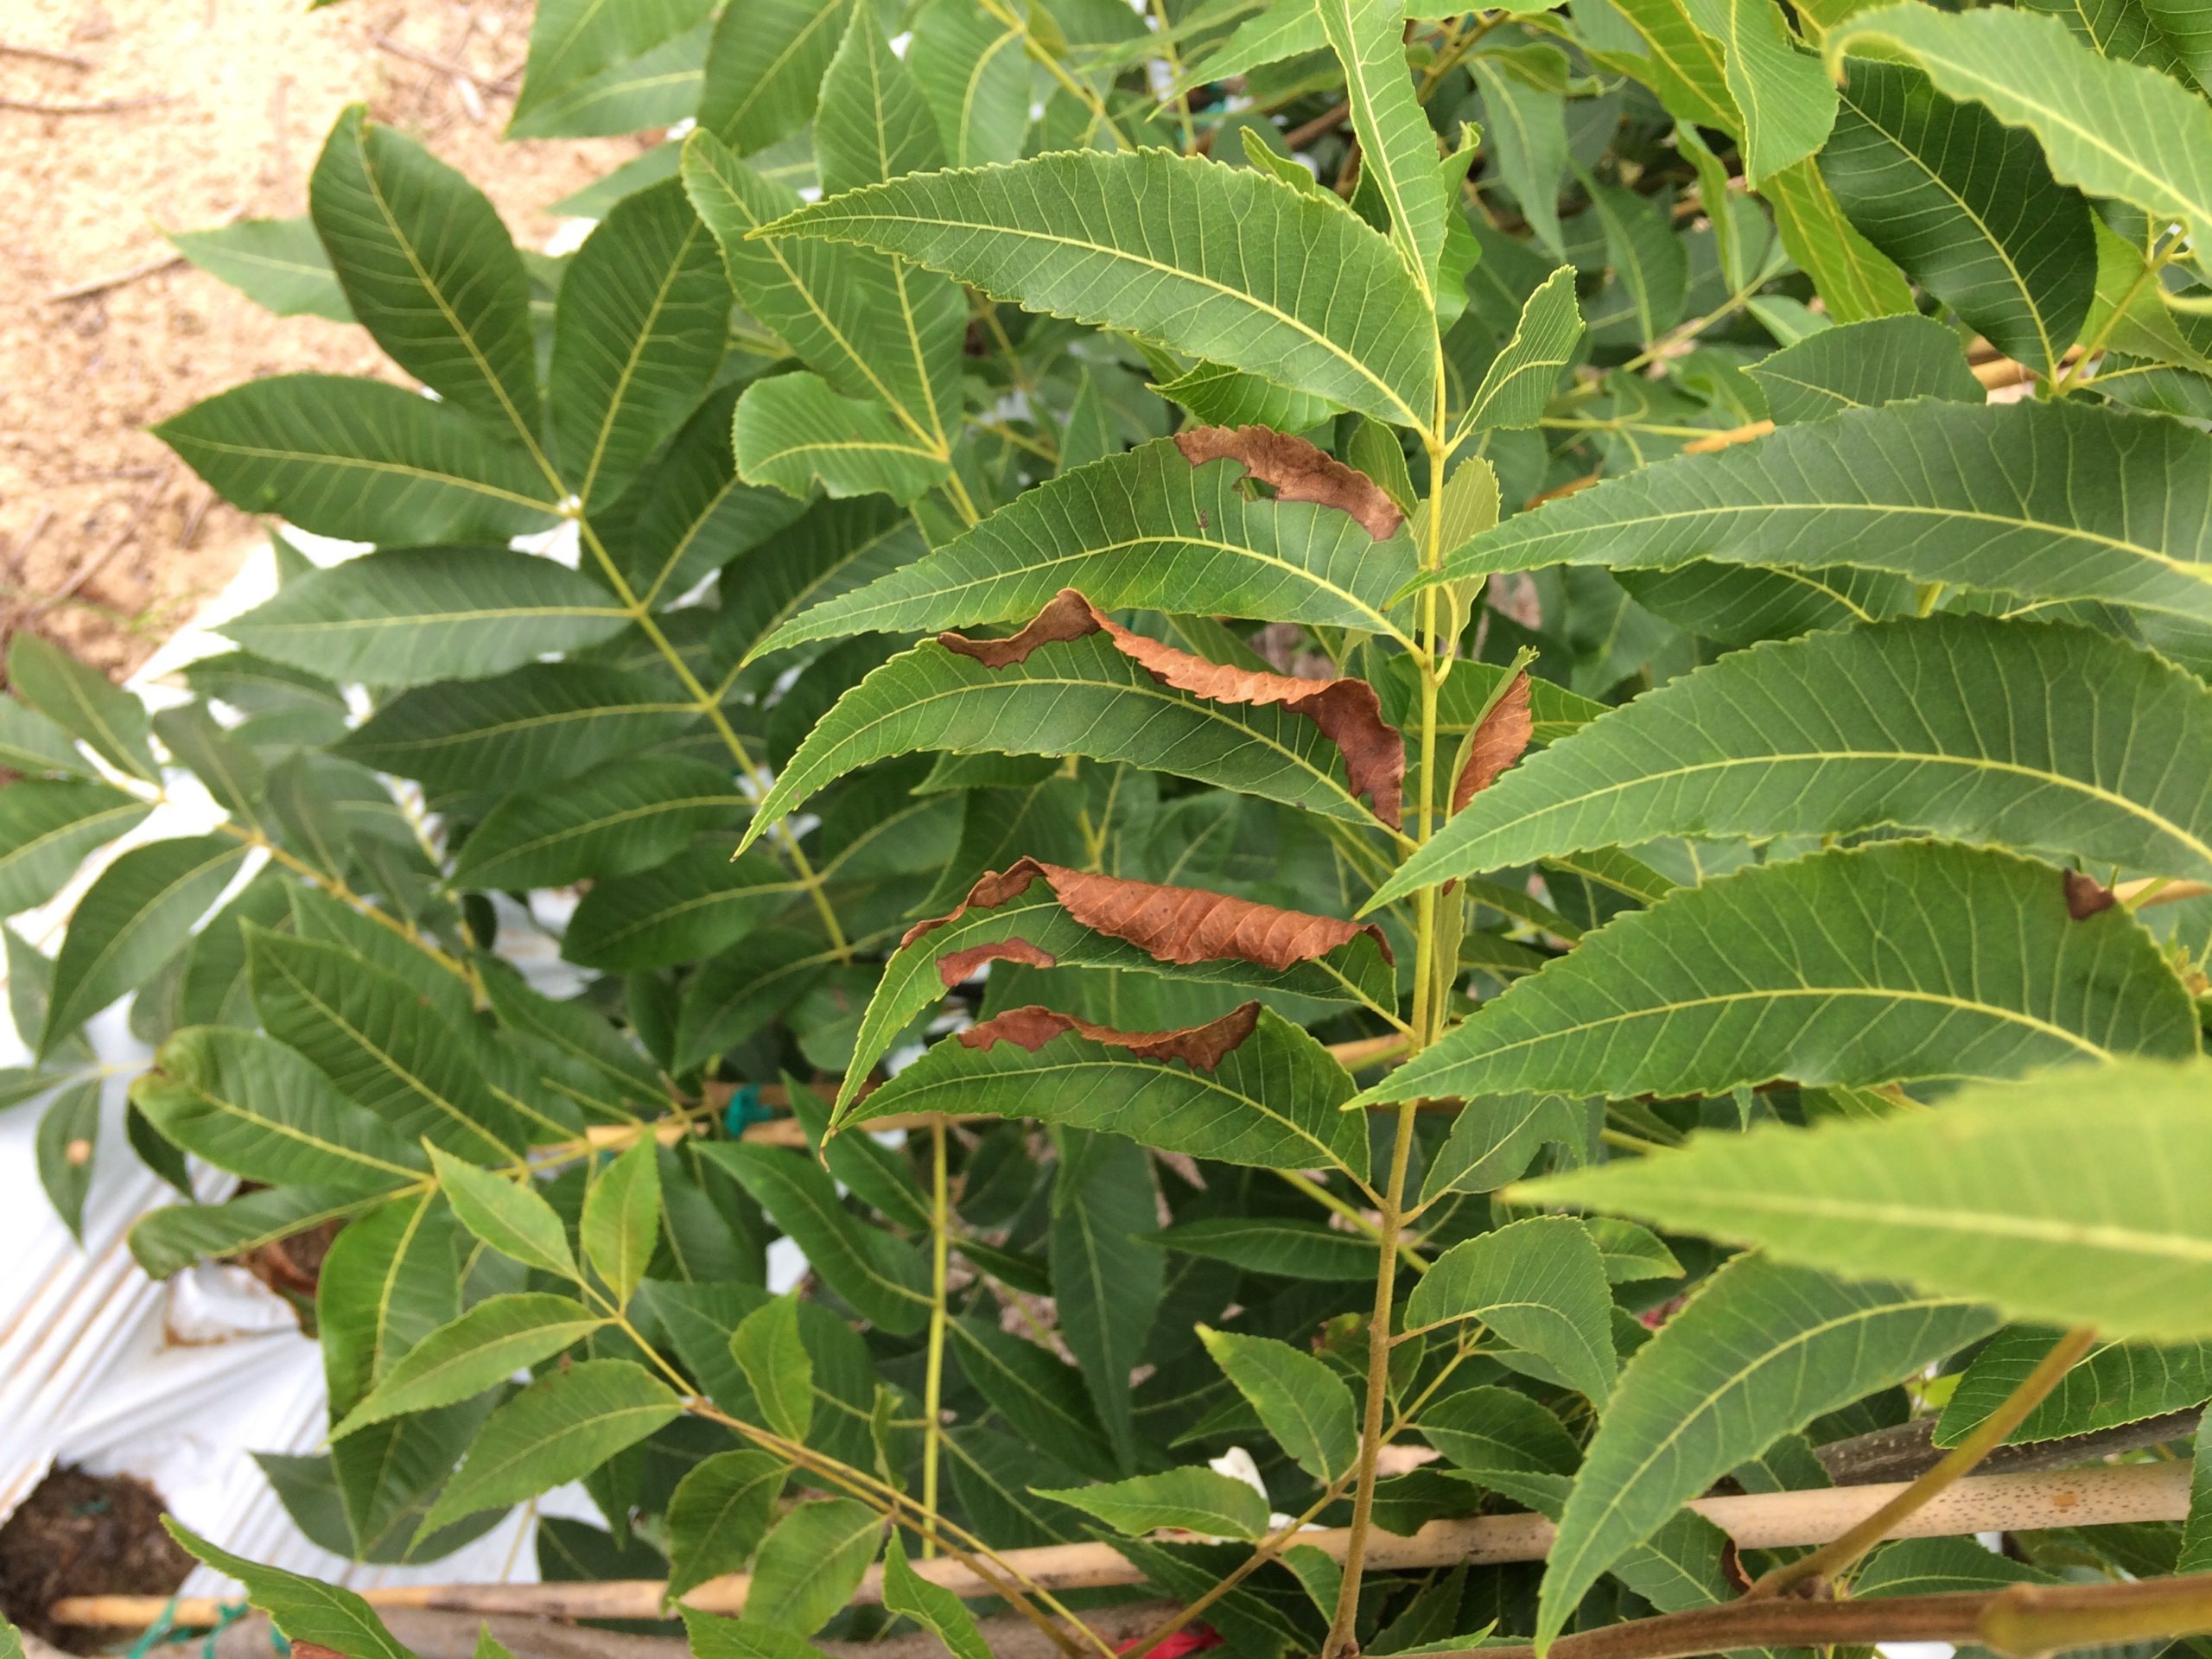 A green bunch of pecan leaves with brown and shriveling edges. This leaflet shows symptoms of the emerging disease Pecan Bacterial Leaf Scorch, or Xylella fastidiosa.